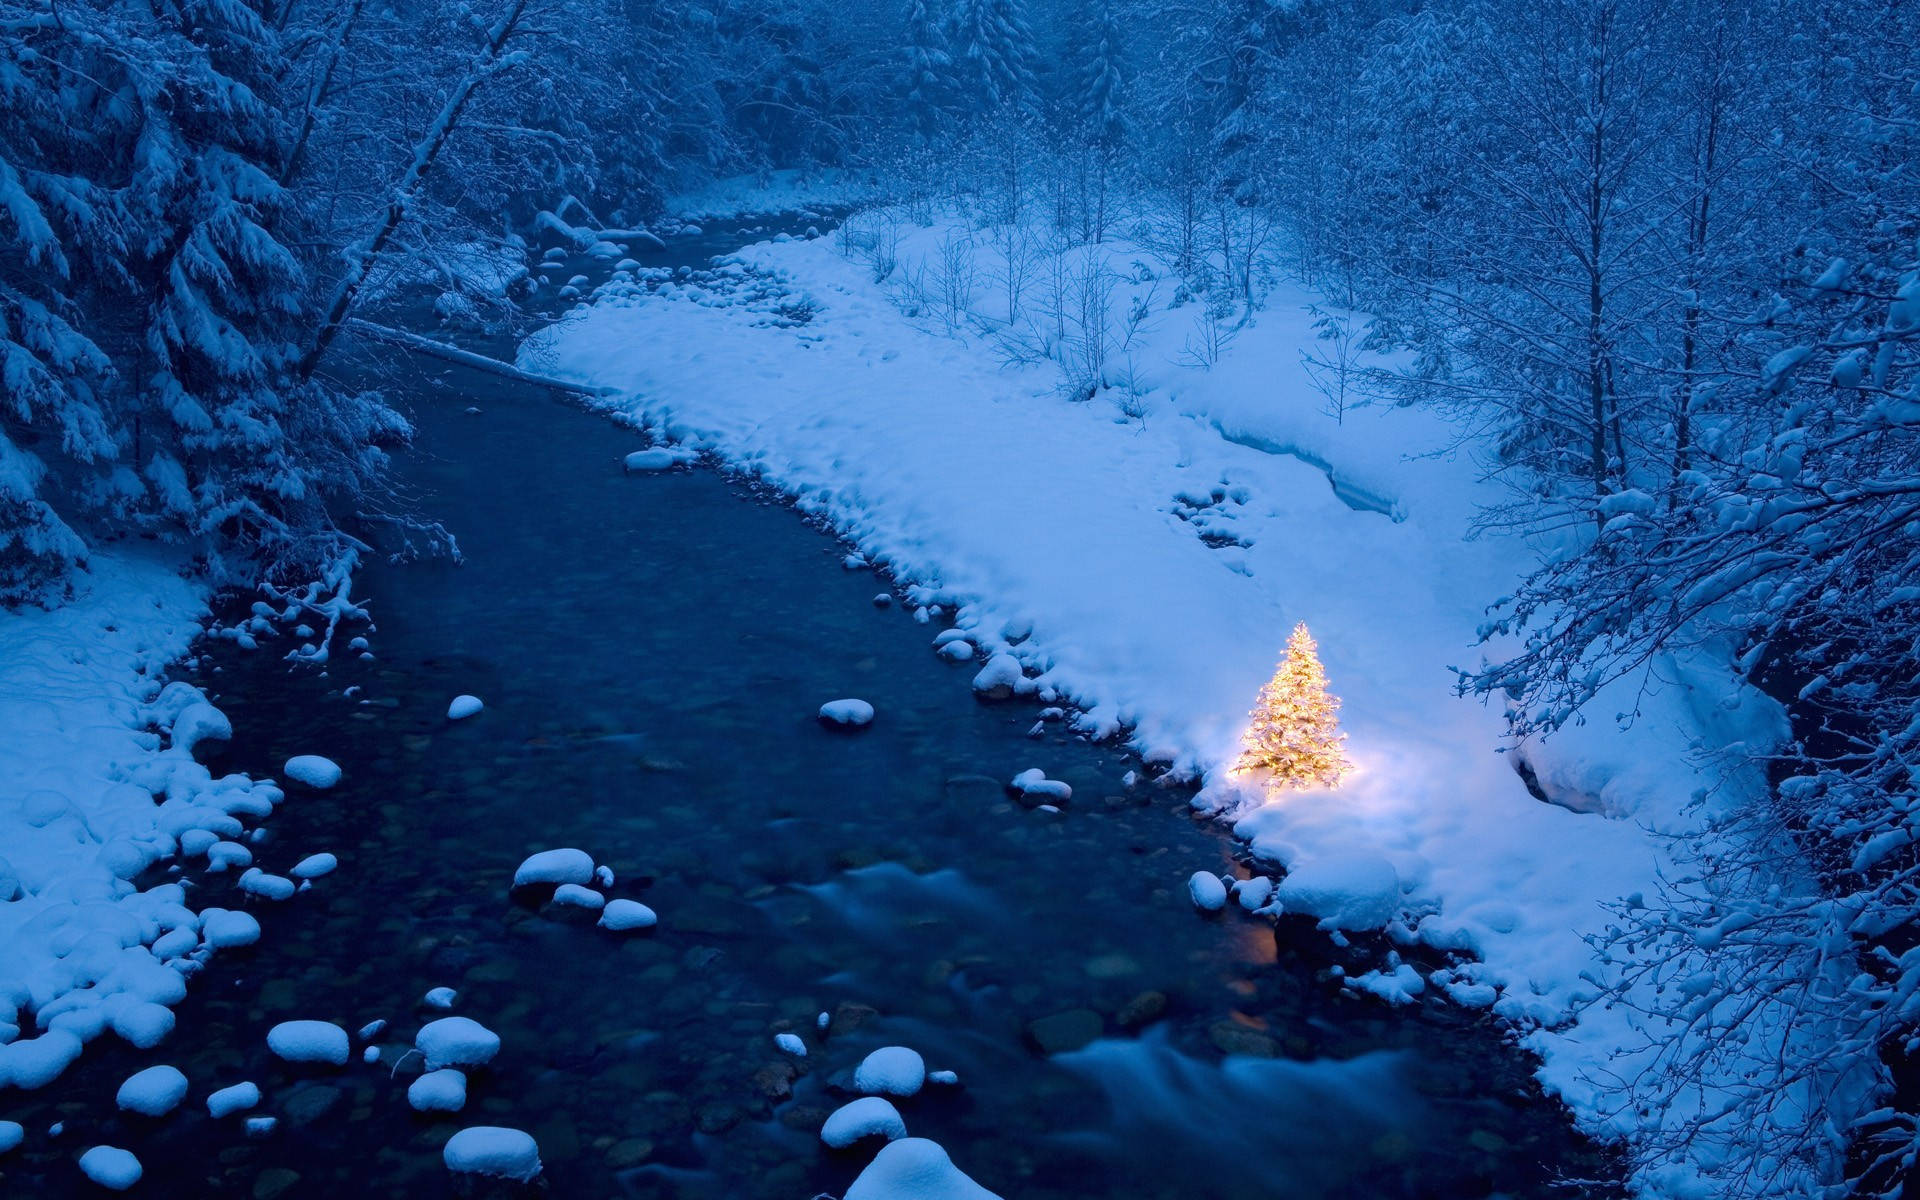 Freezing River In The Christmas Forest Wallpaper